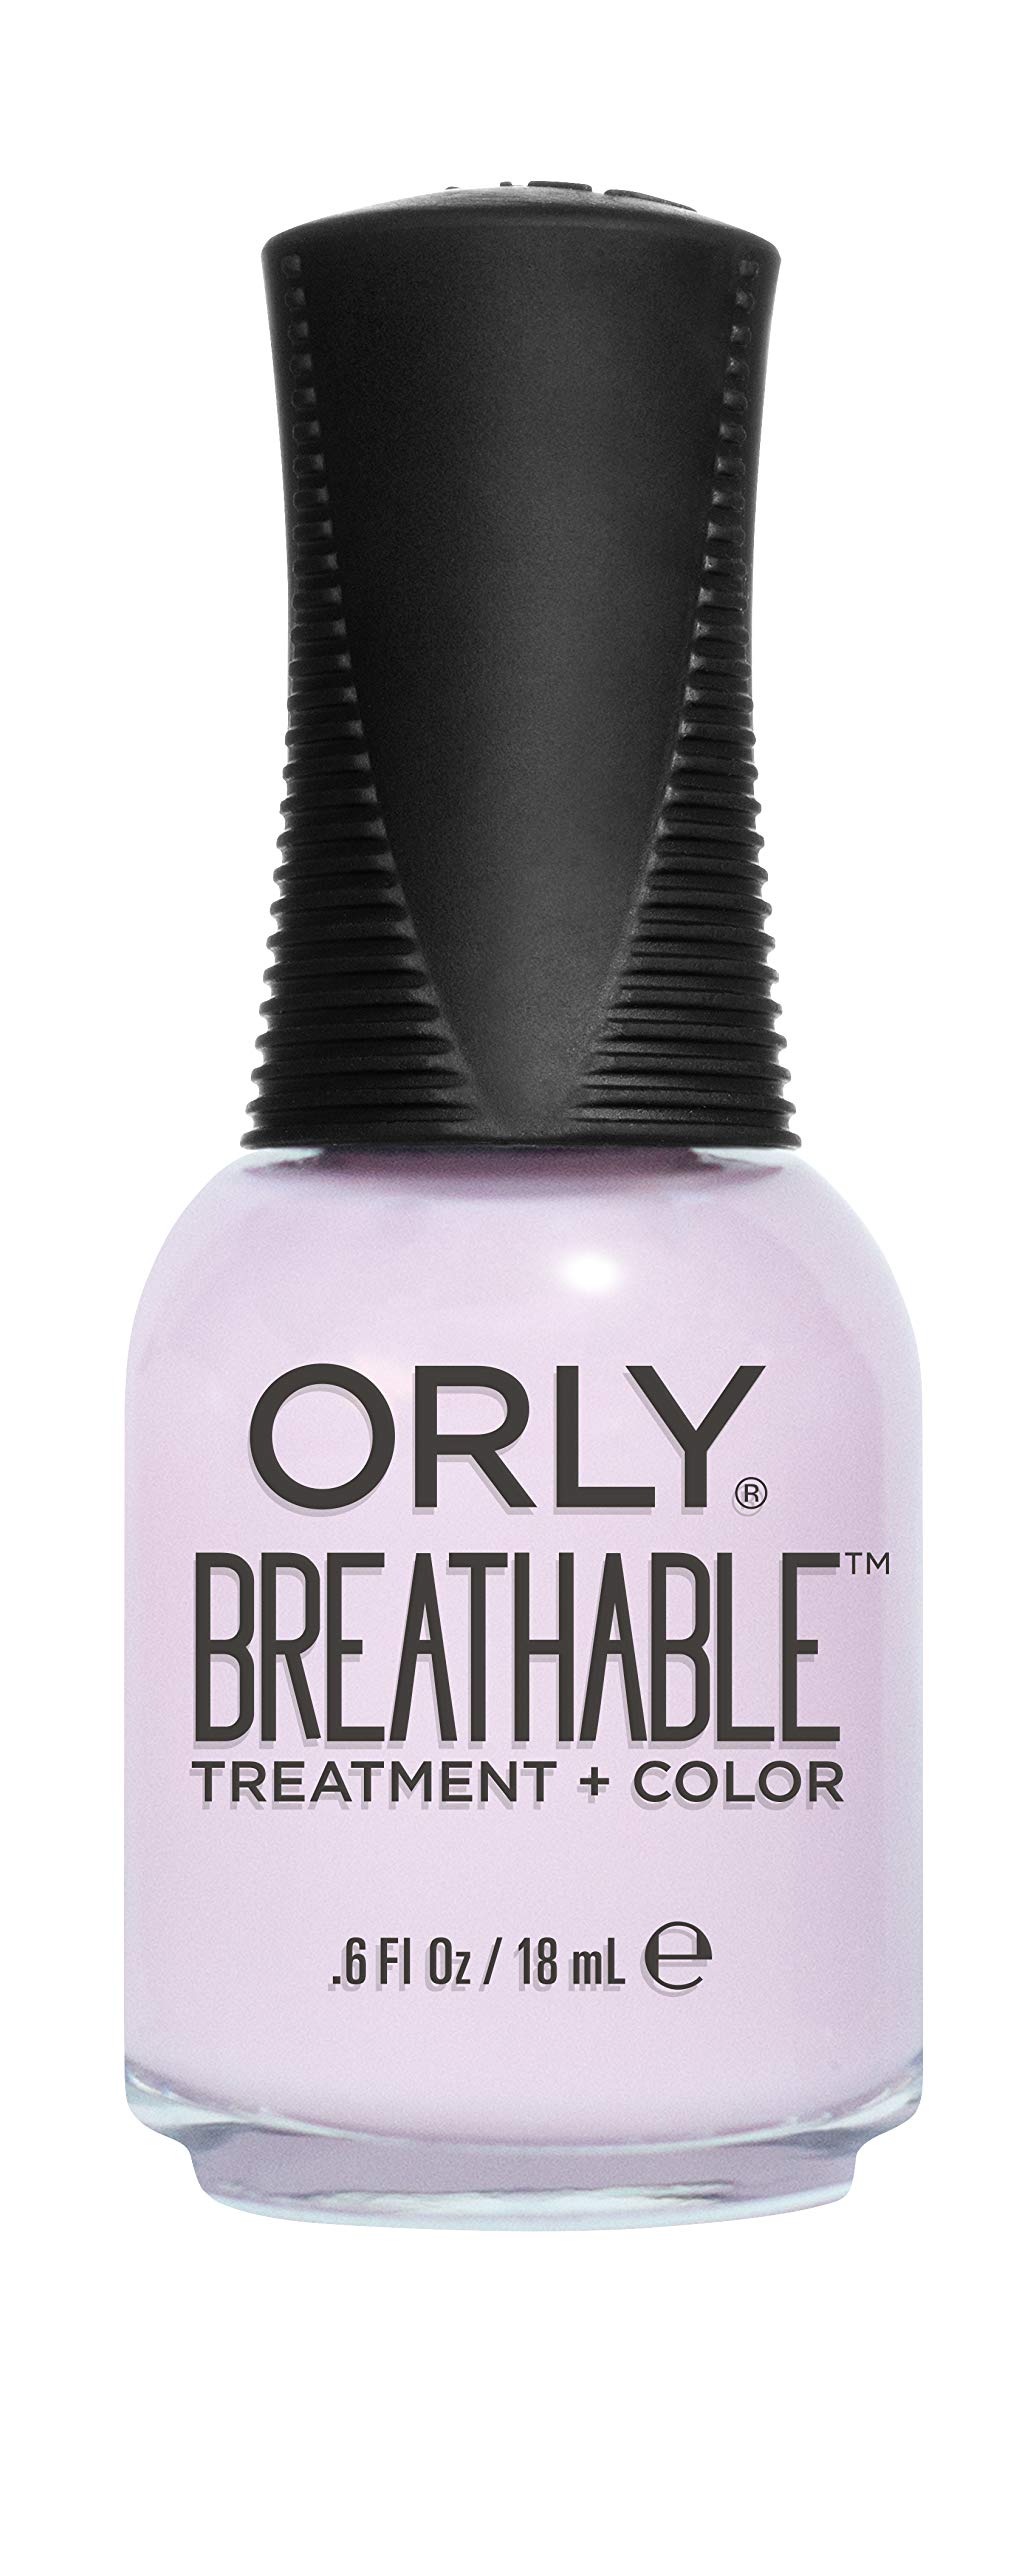 Orly Breathable Nail Color, Pamper Me, 0.6 Fluid Ounce